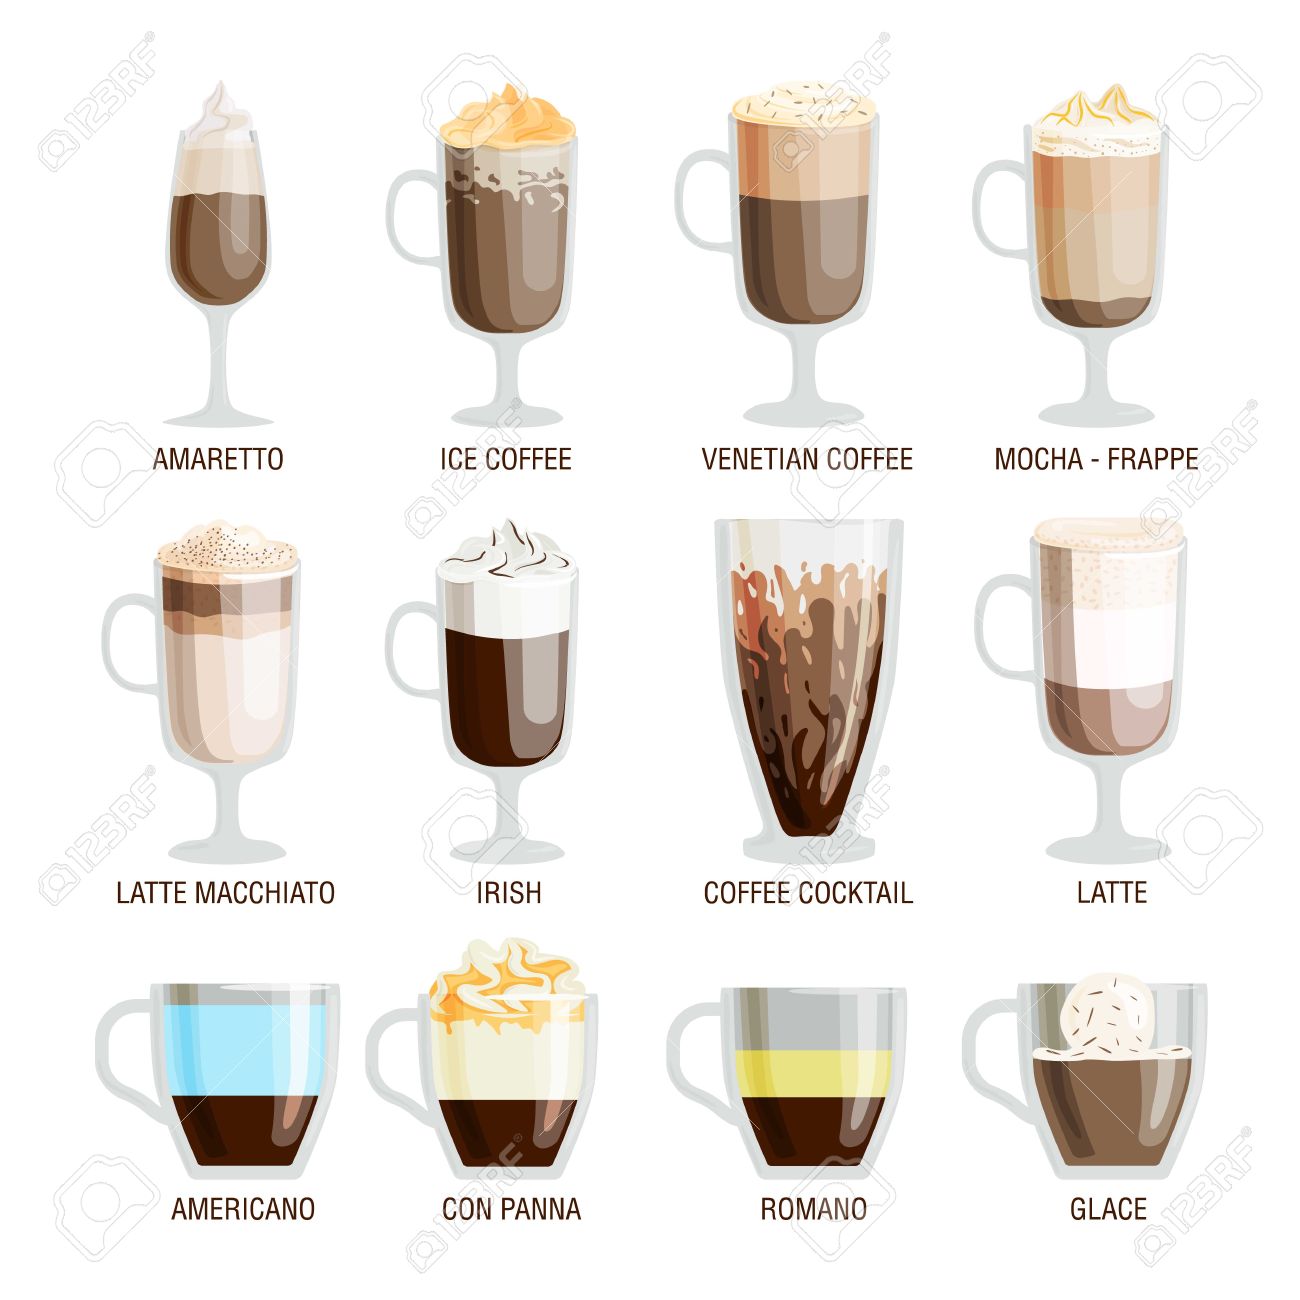 Espresso with foam clipart 20 free Cliparts | Download images on ...